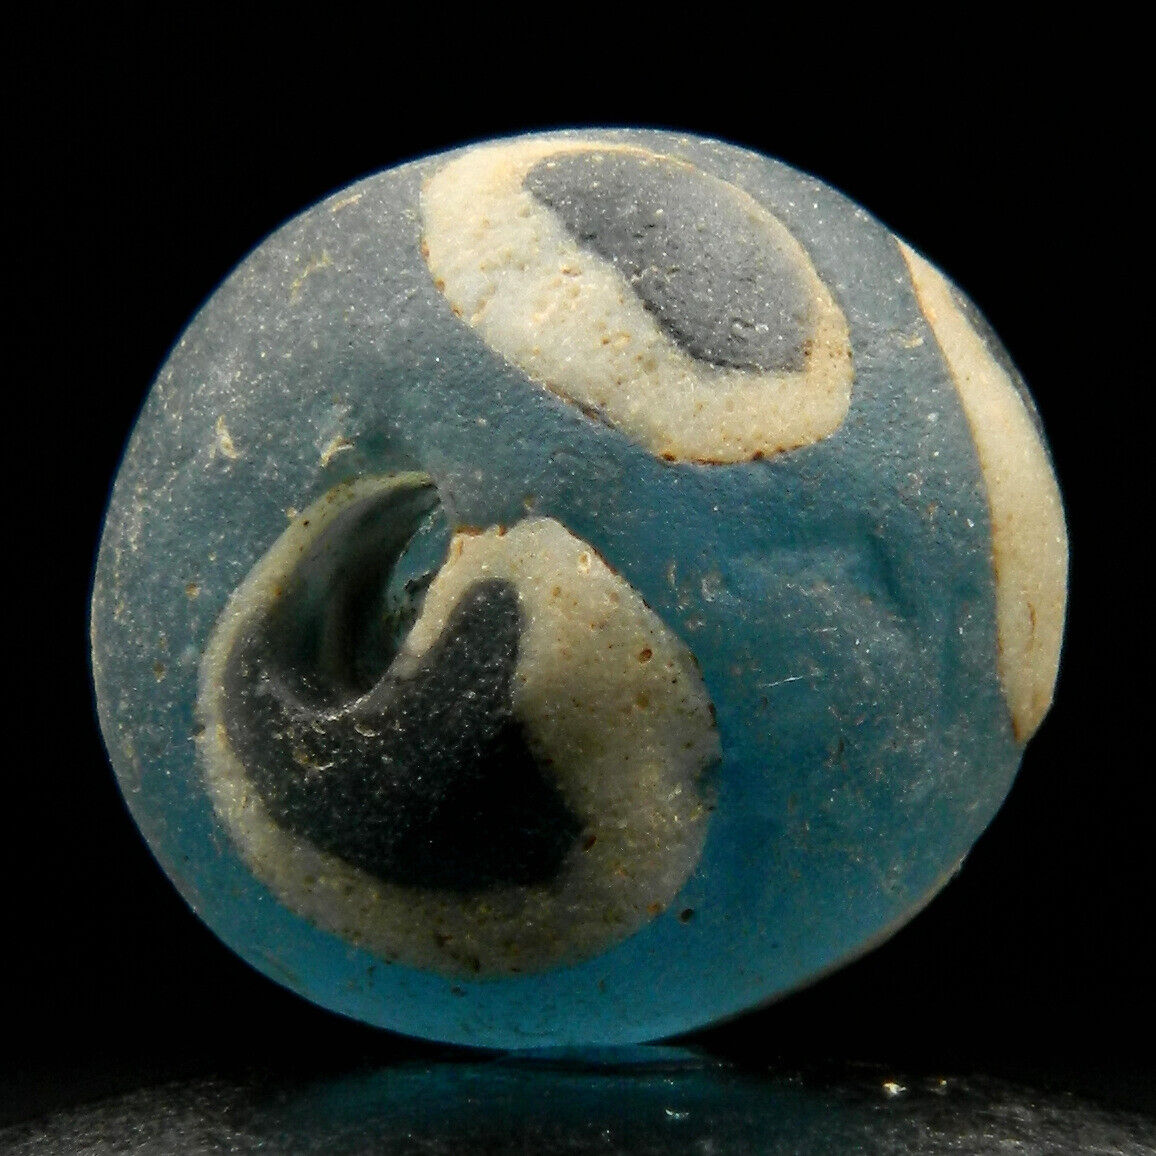 KYRA MINT - Antique ROMAN Glass EYE Bead - 13.1 mm large - 1900 years OLD